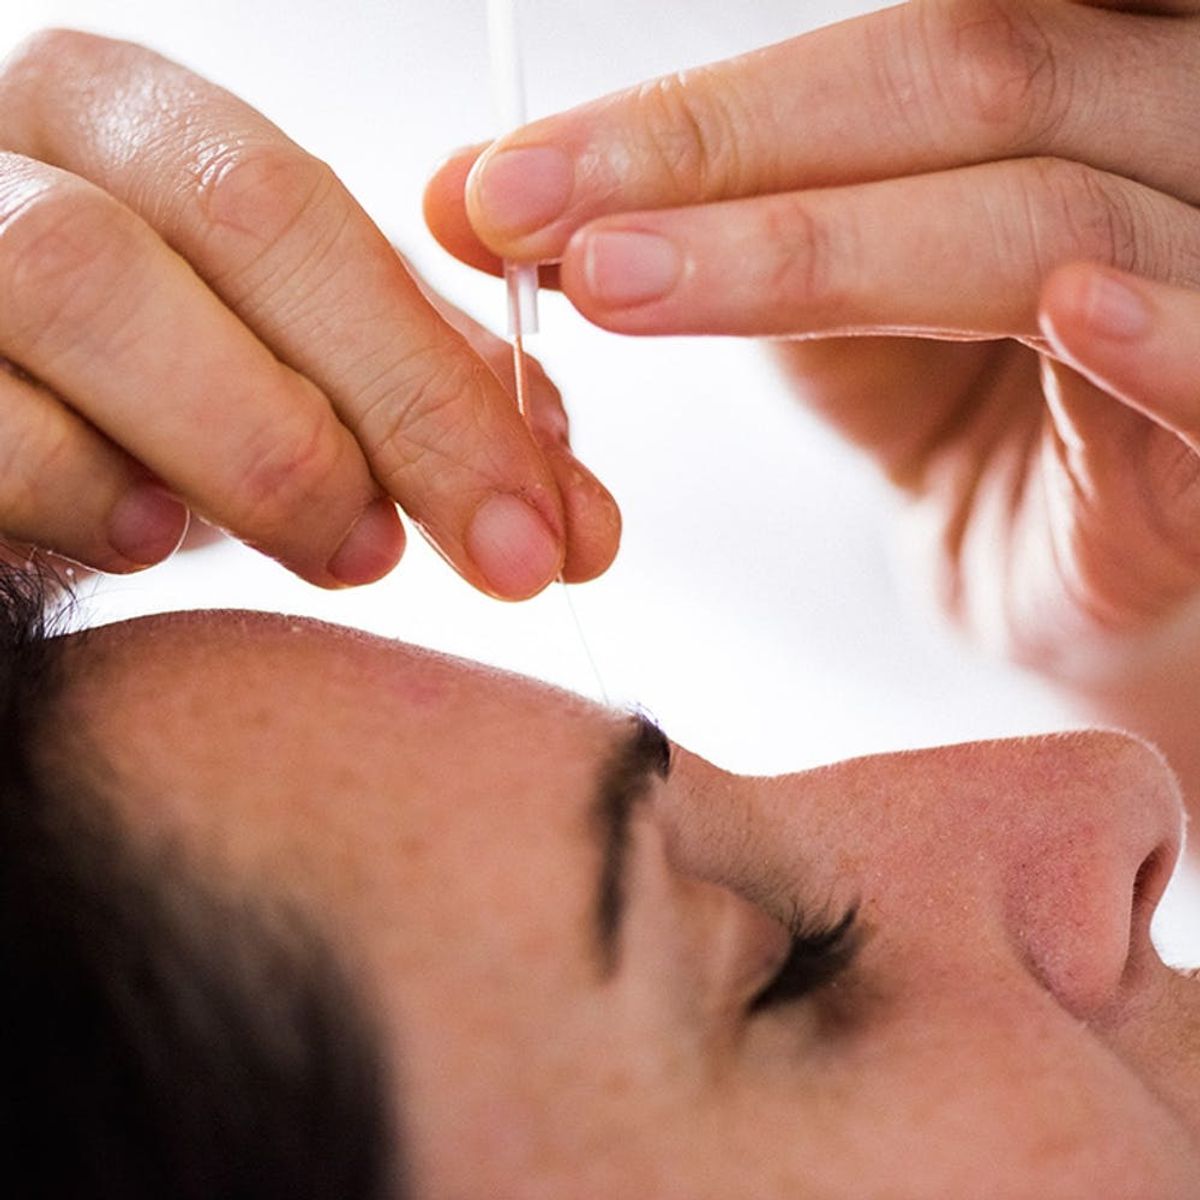 4 Ways Acupuncture Can Improve Your Appearance